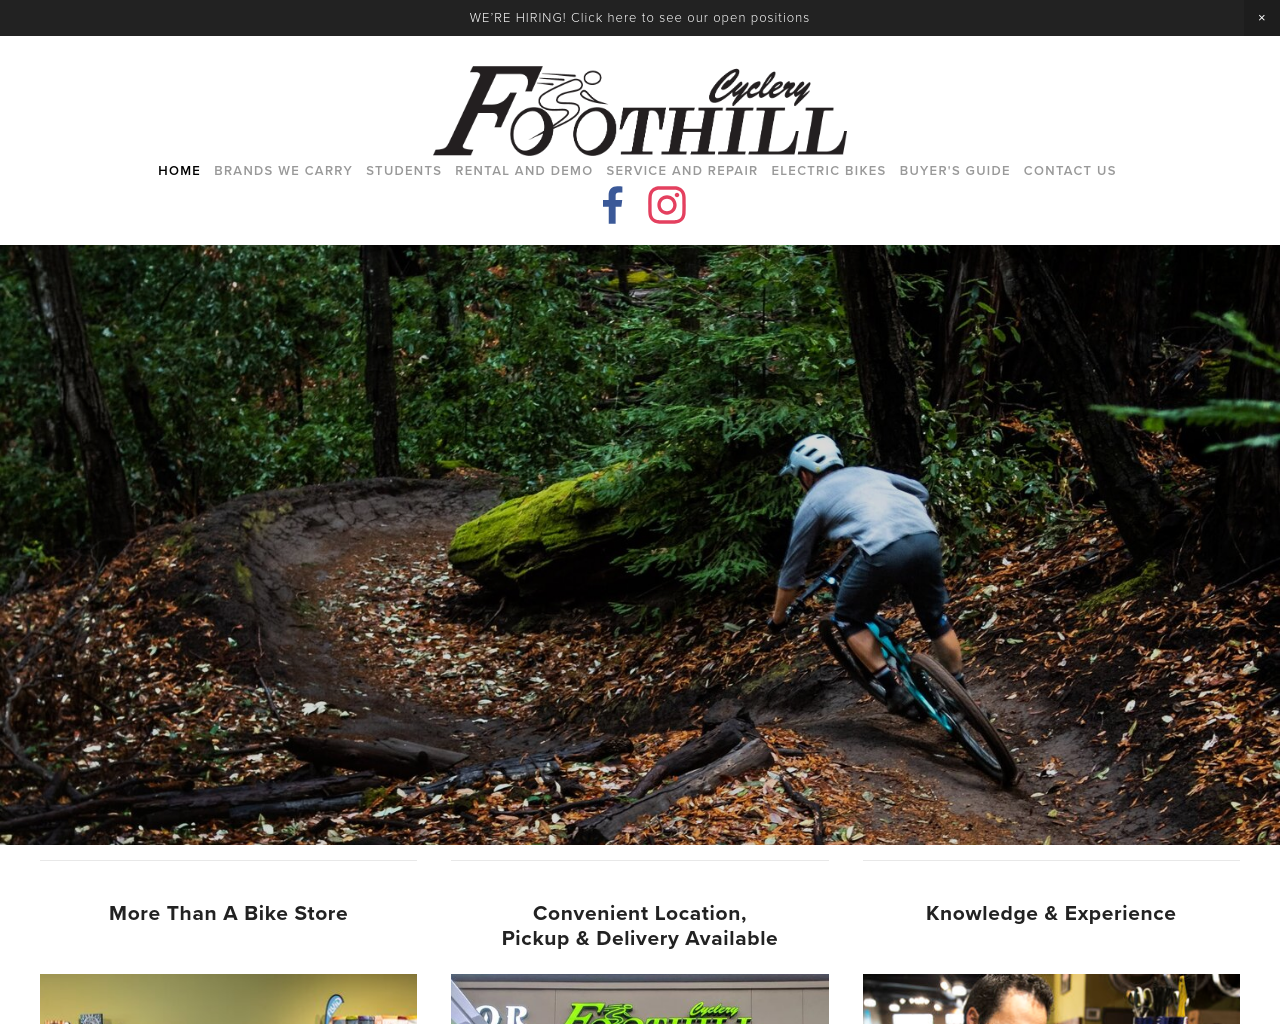 foothillcyclery.com